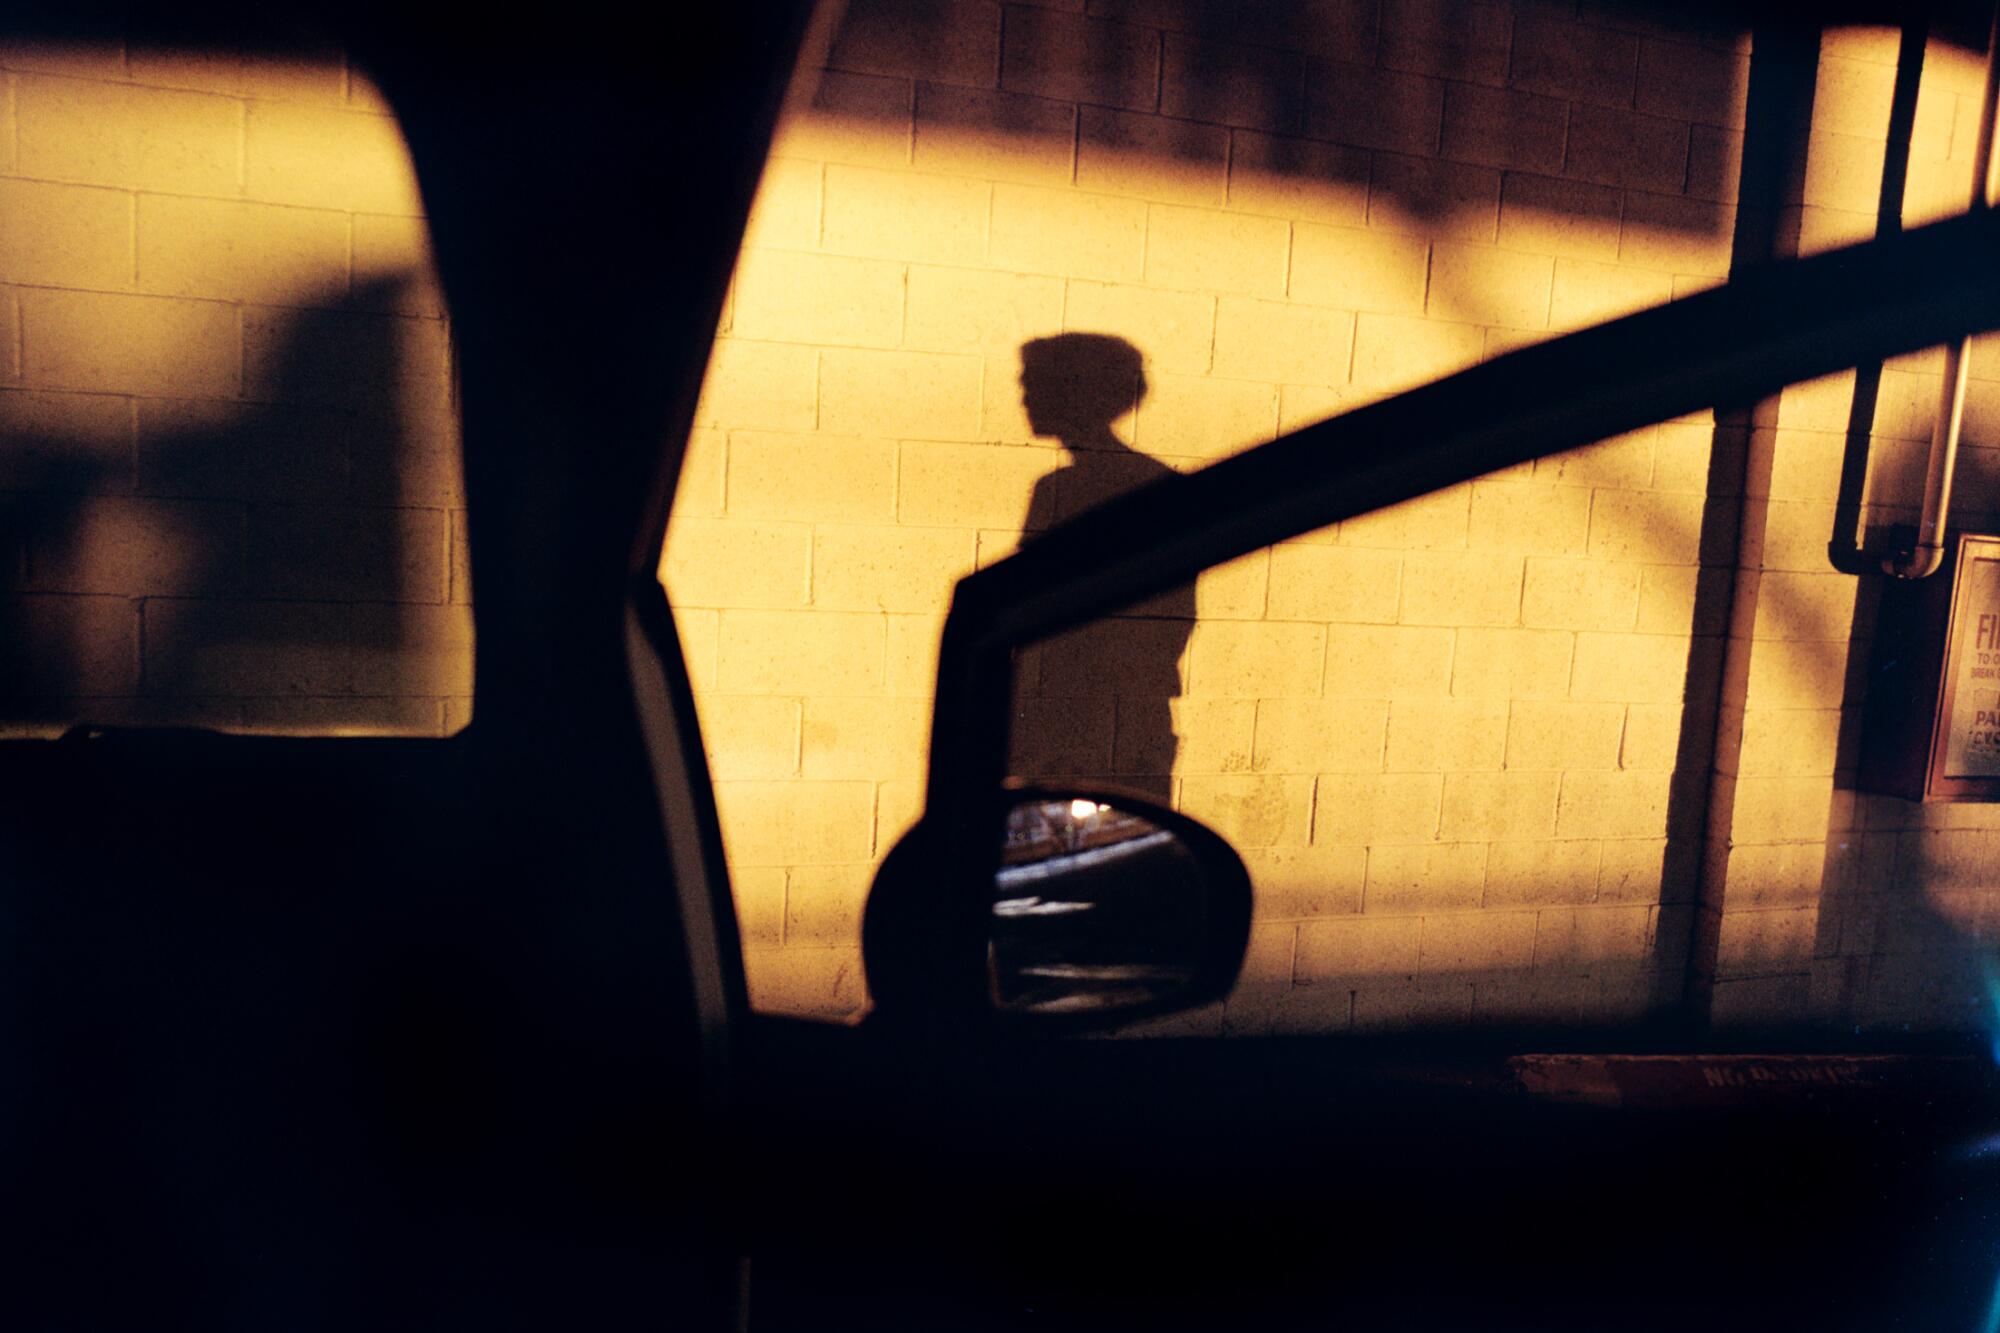 The shadow of a person standing outside an open car door